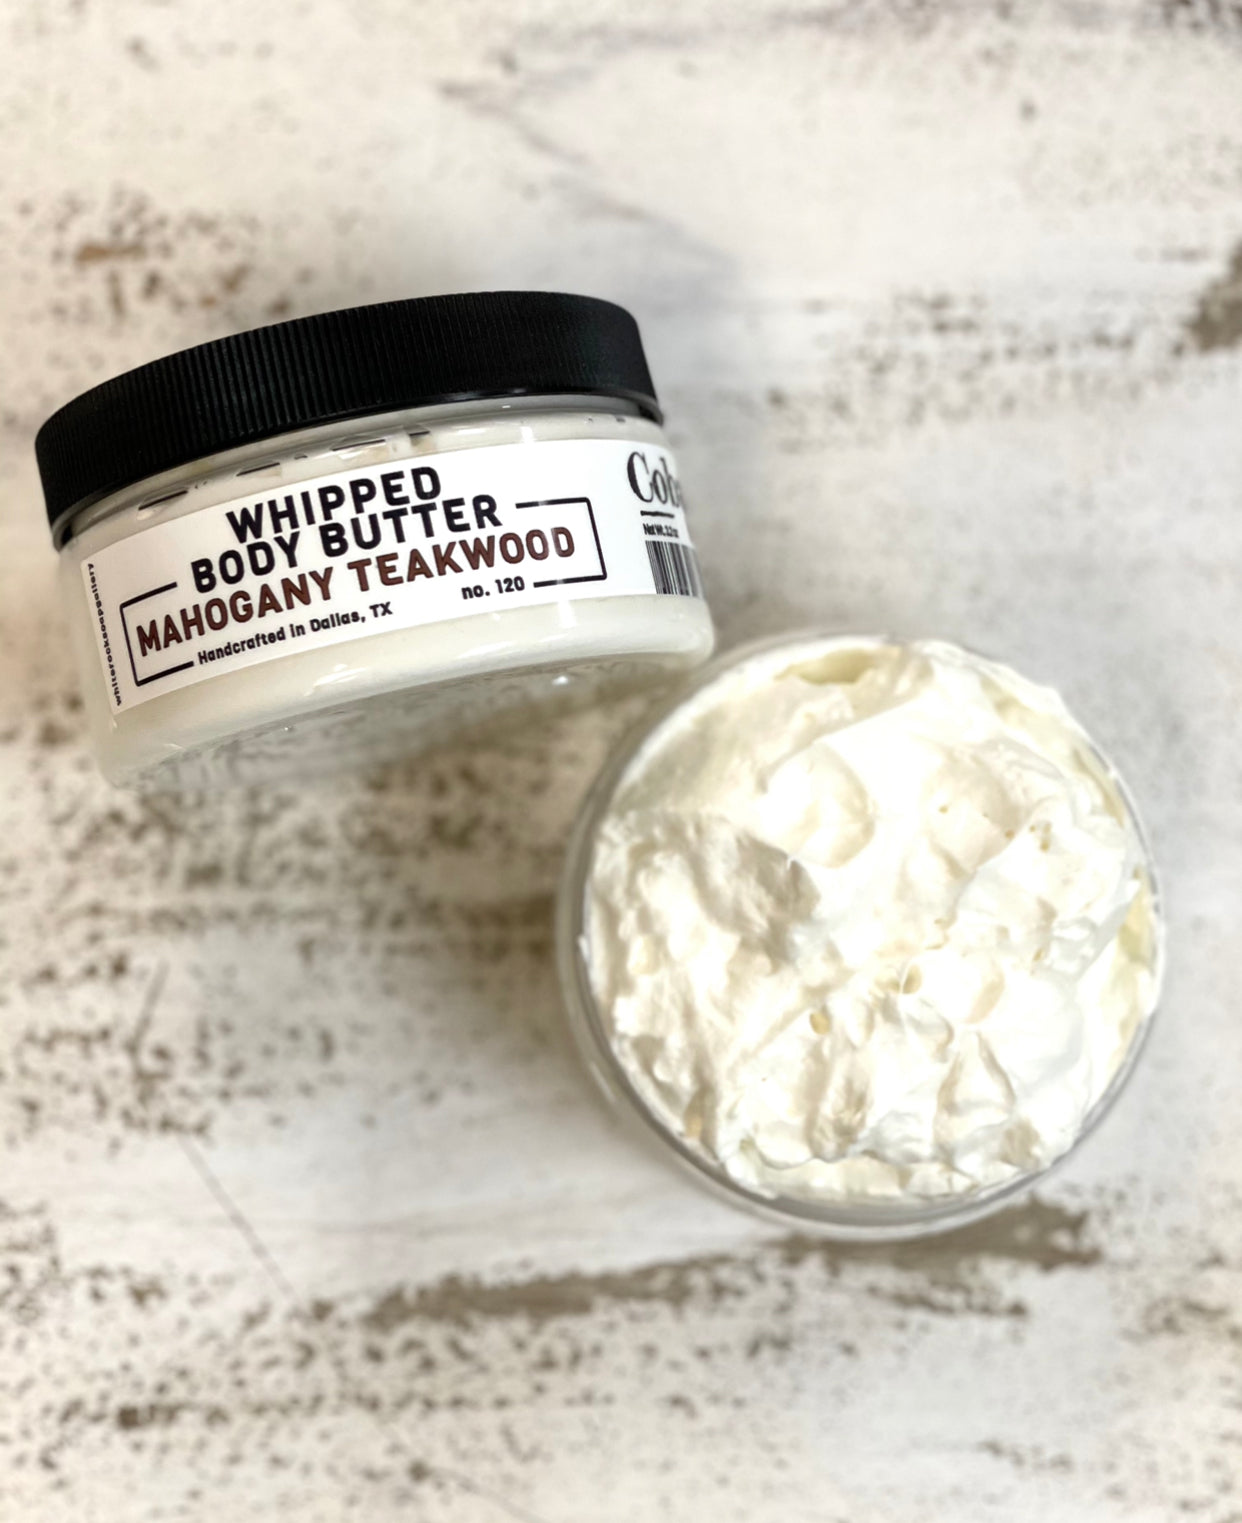 Cobalt Soap Co. Whipped Body Butter